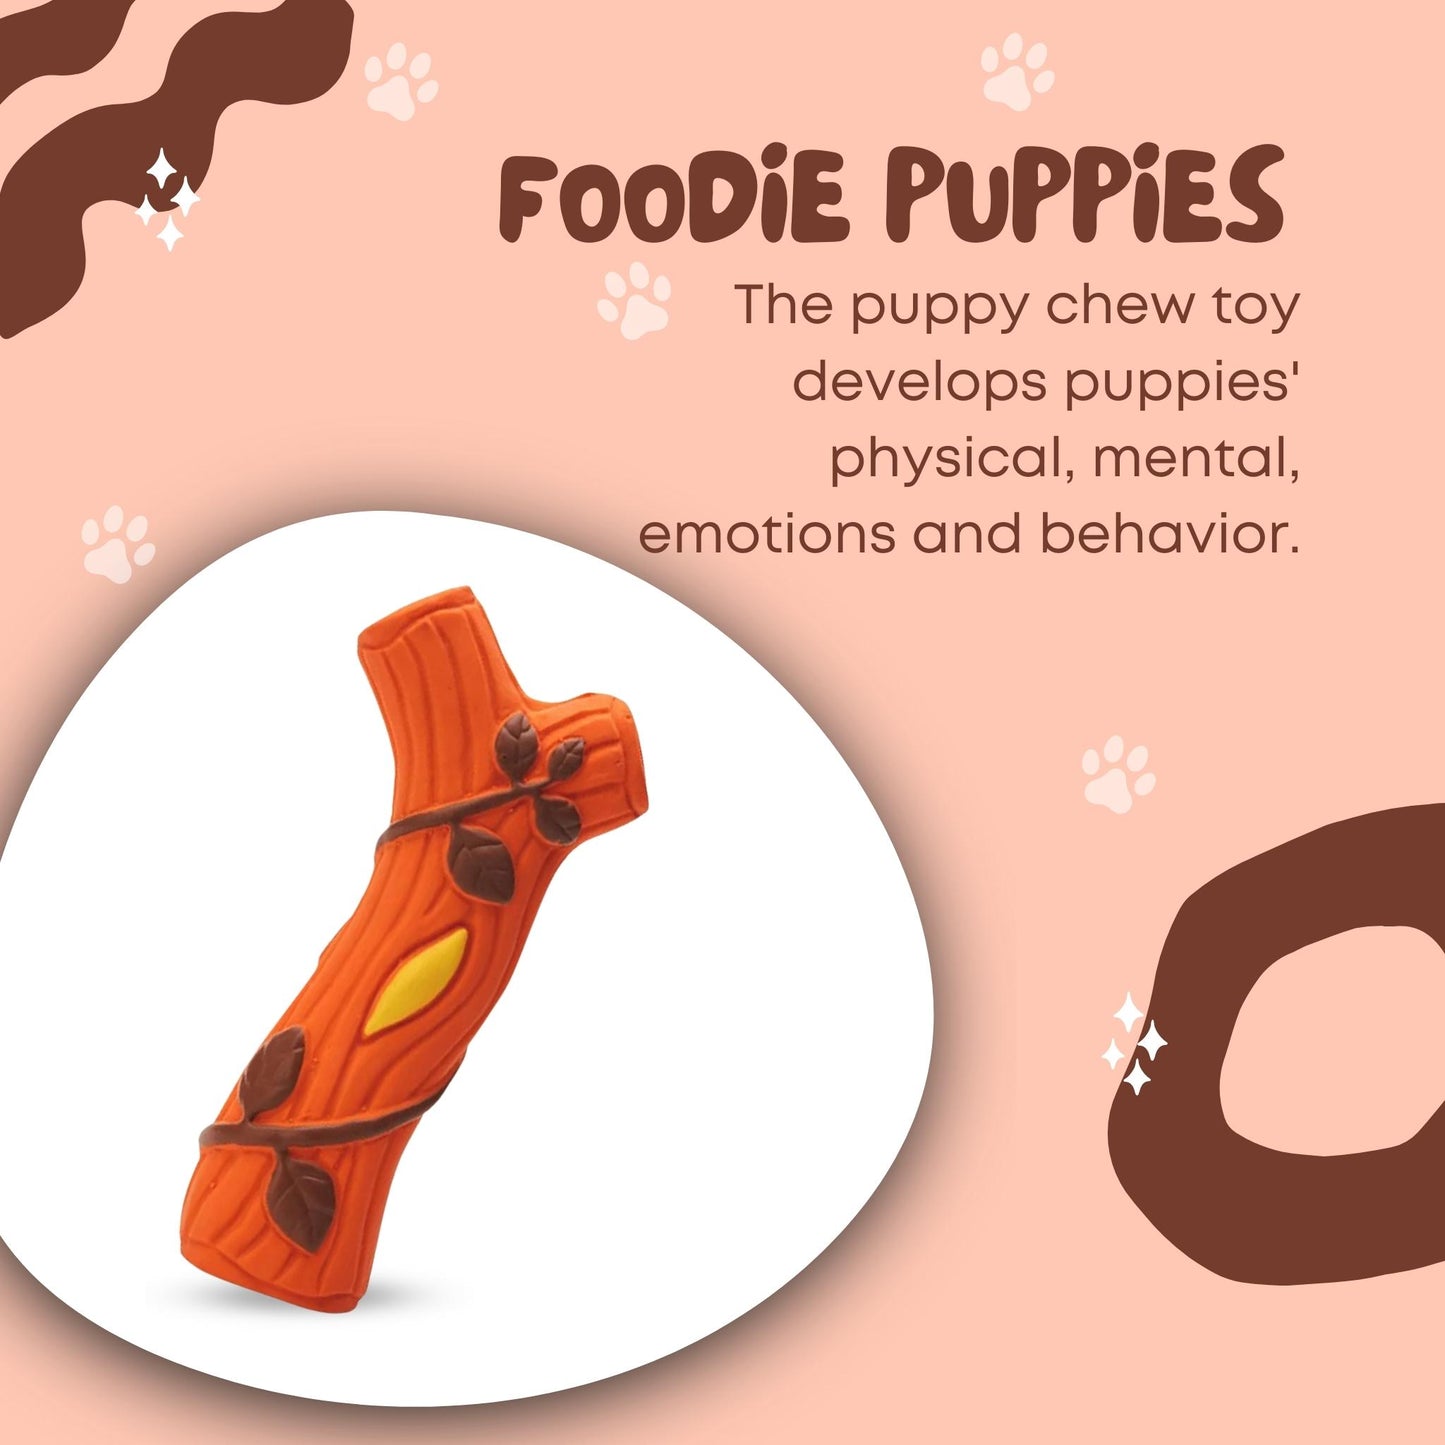 Foodie Puppies Latex Squeaky Toy for Dogs & Puppies - Branch, Small